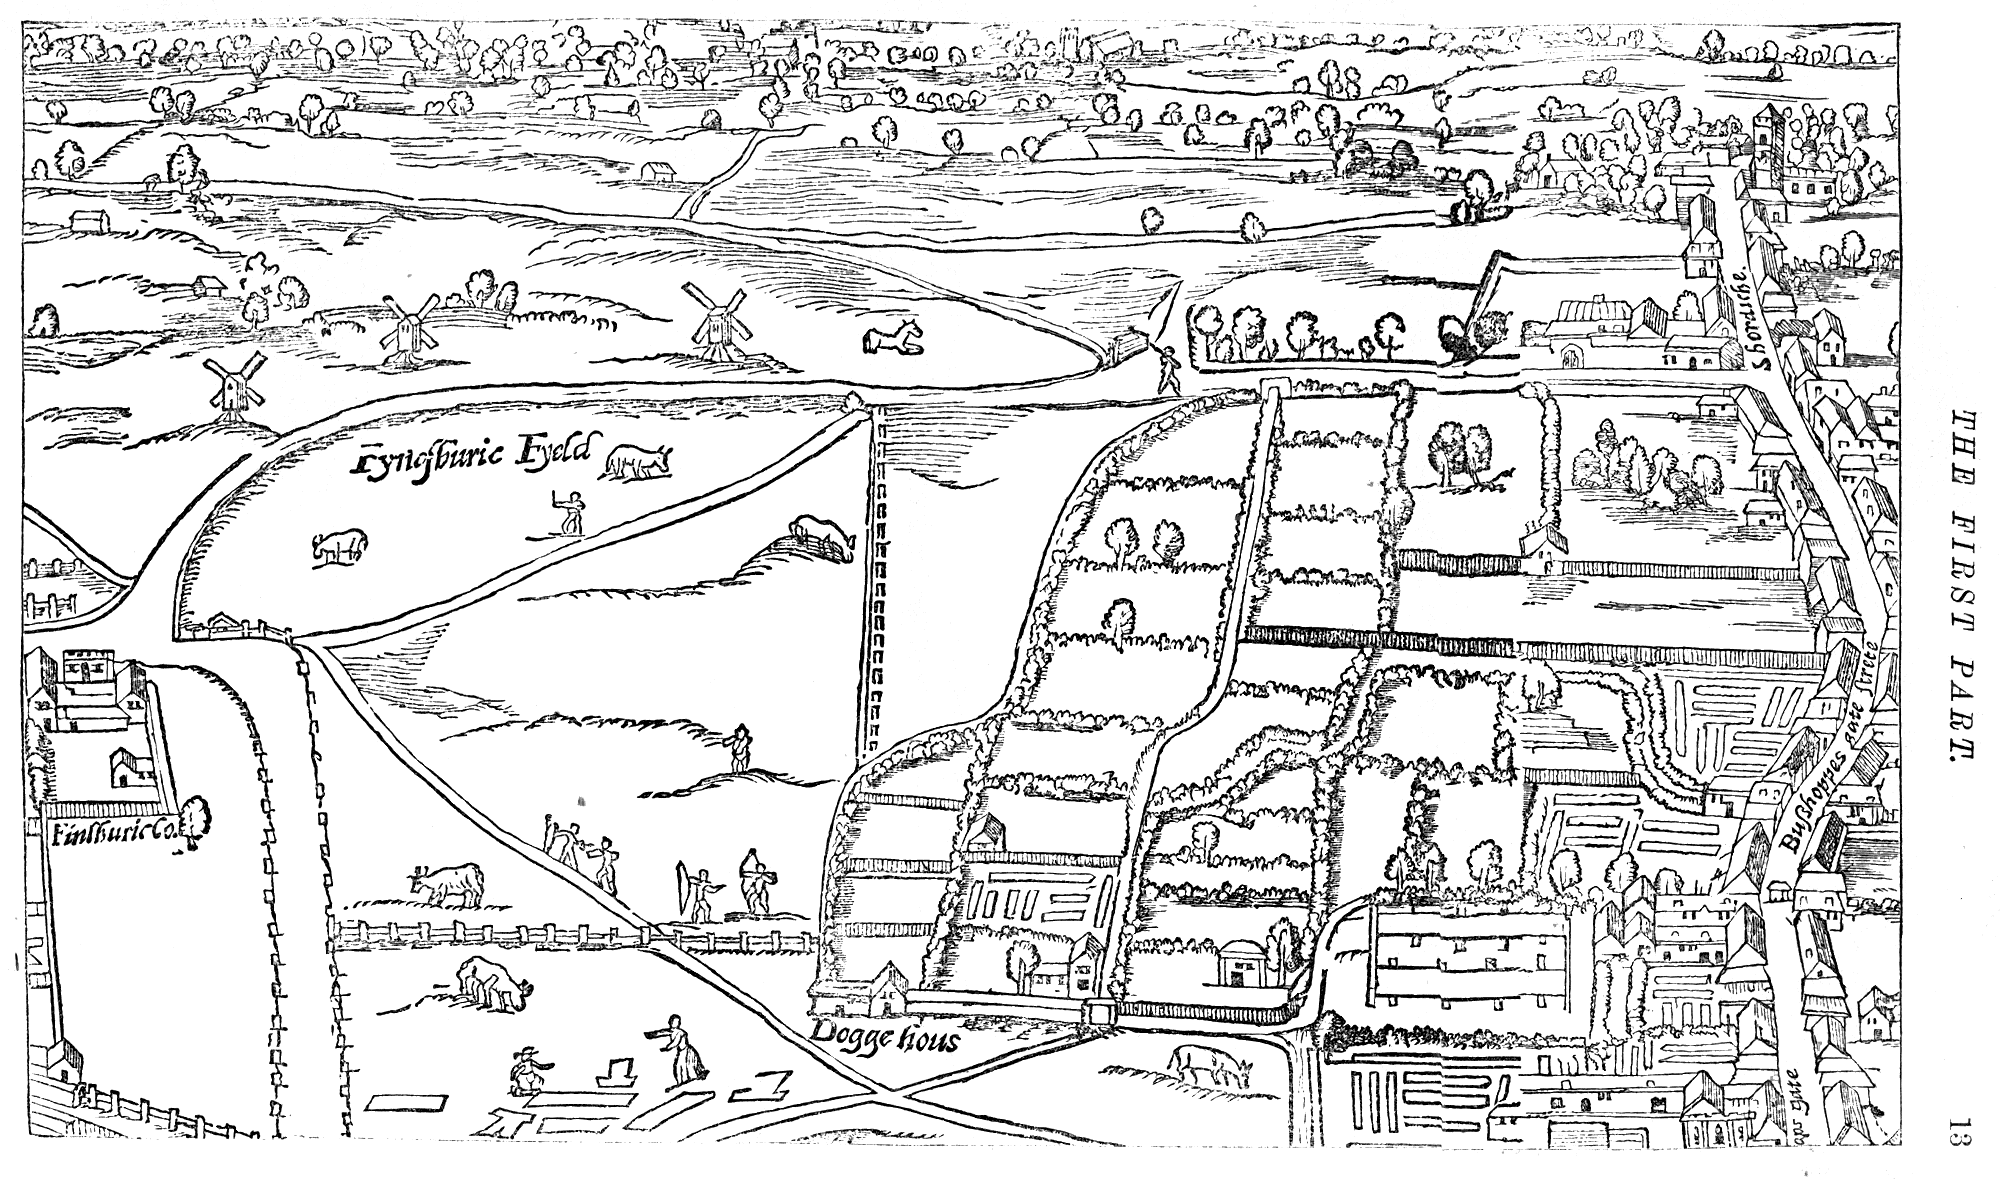 Portion of Aggas's 16th century map of London from the original preserved at the Guildhall.  From James Halliwell 'Illustrations of the life of Shakespeare' (1874), page 13, published size in Halliwell 25cm wide by 15.2cm high.